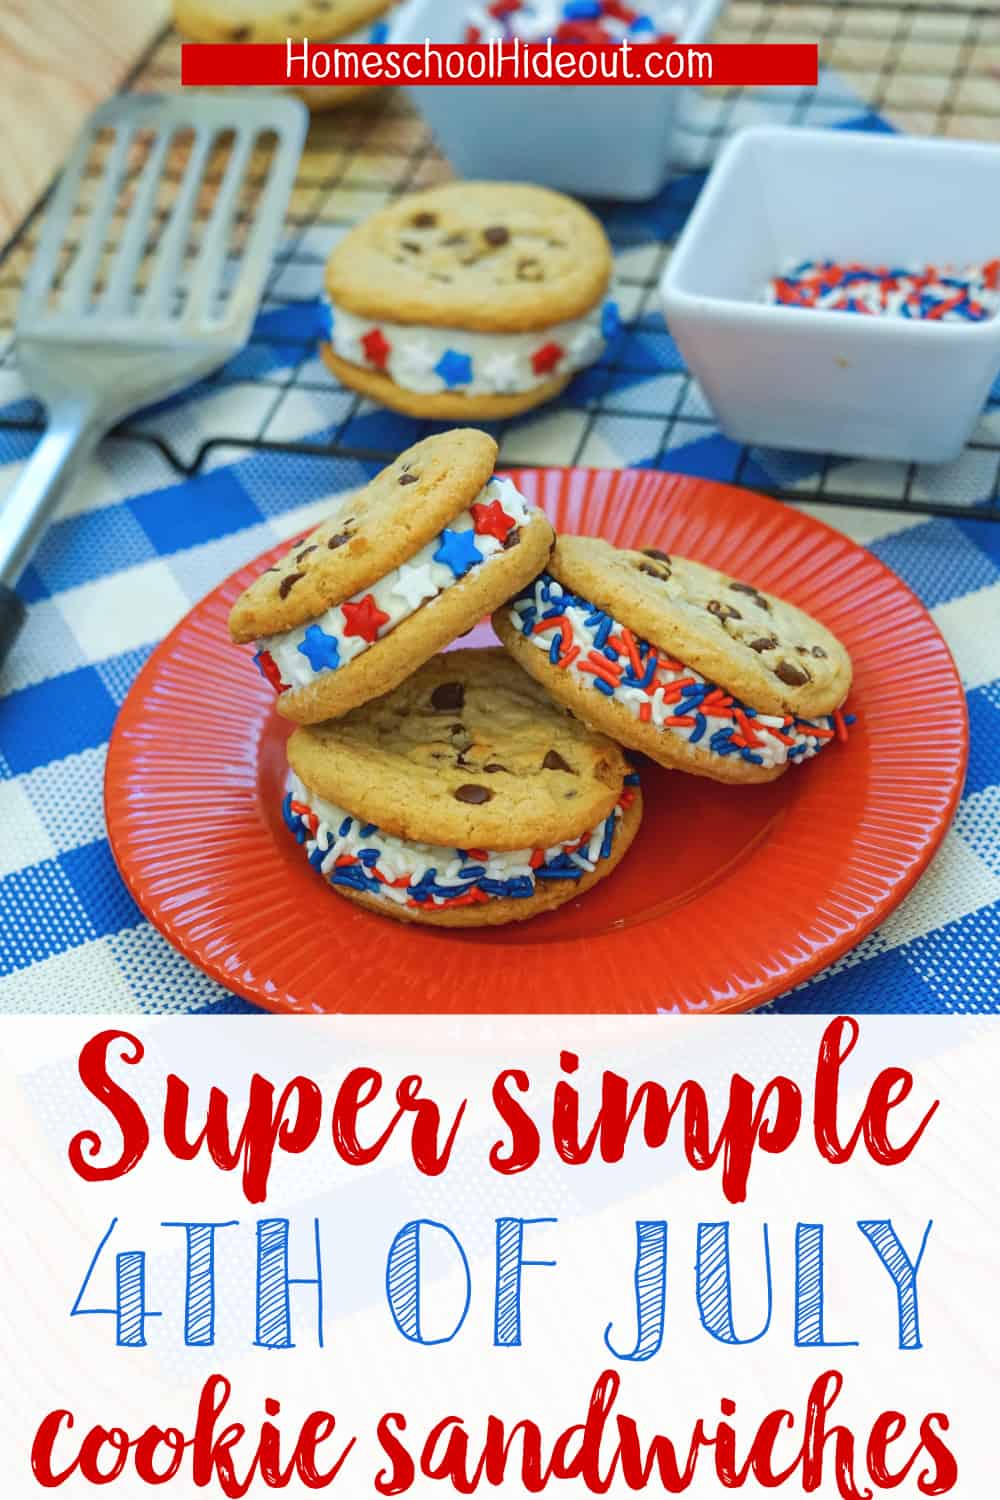 These yummy red, white and blue cookie sandwiches are the perfect treat for hot summer days, barbecues and birthday parties!